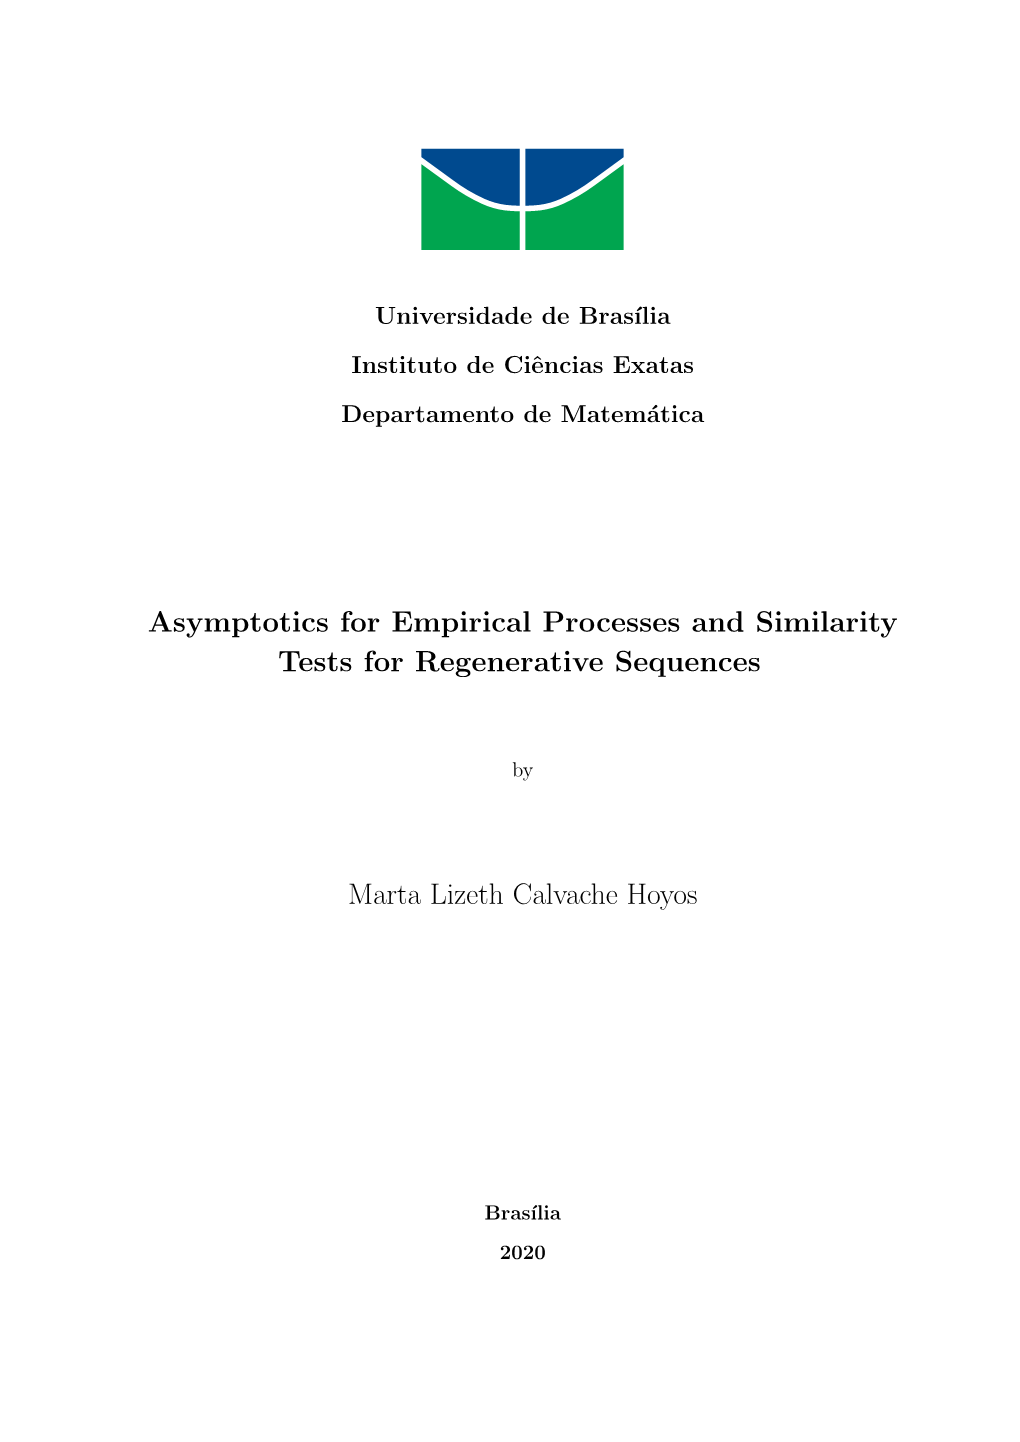 Asymptotics for Empirical Processes and Similarity Tests for Regenerative Sequences